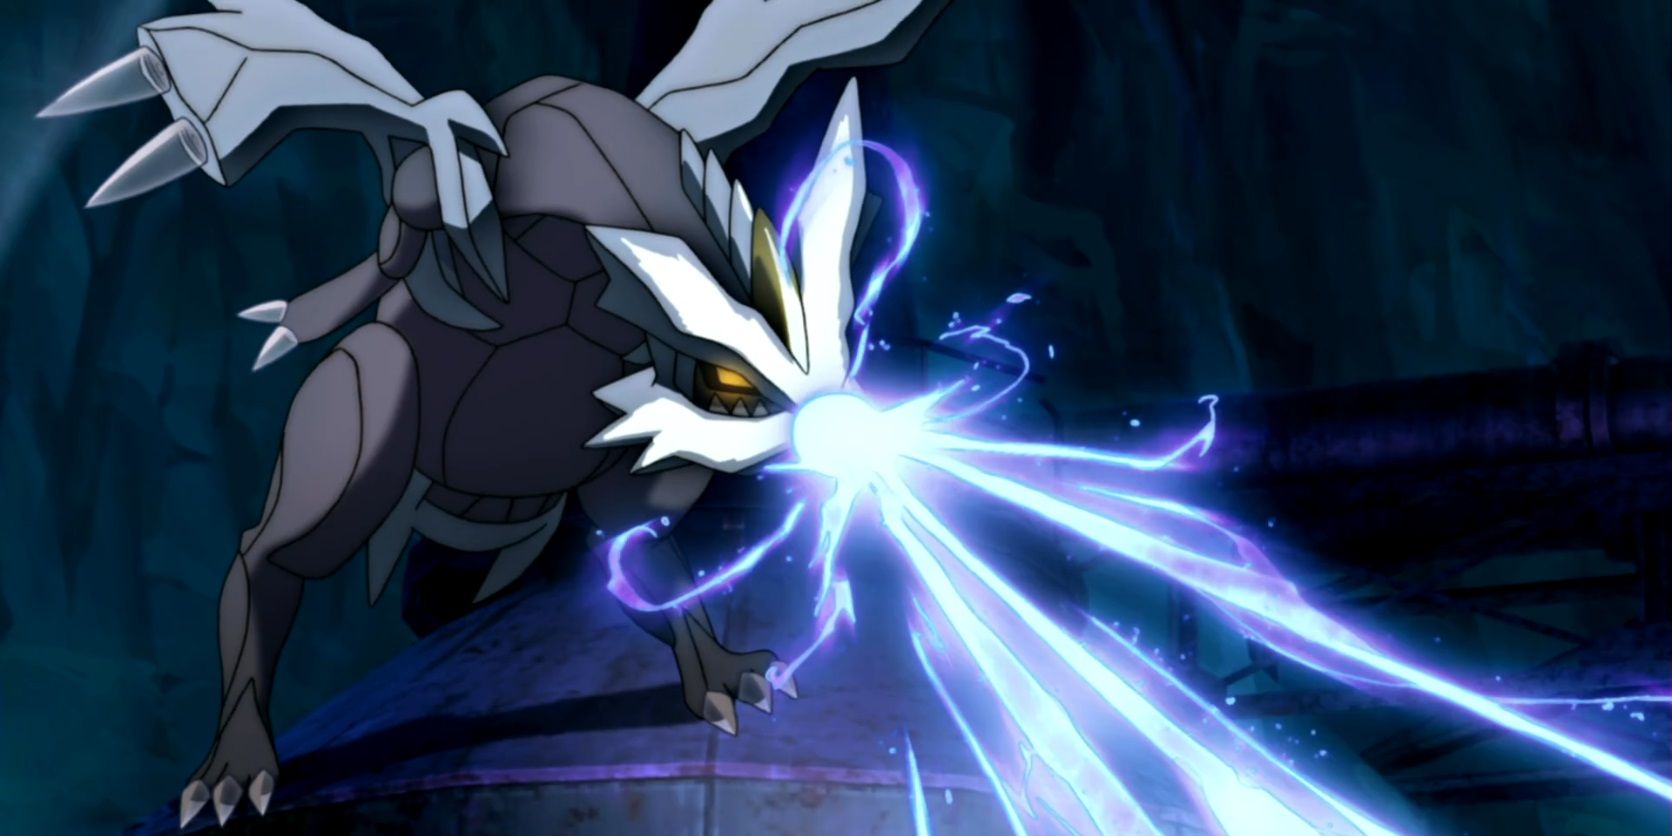 Every Pokémon With Fusion Capabilities In Sword & Shield (Including Both DLCs)